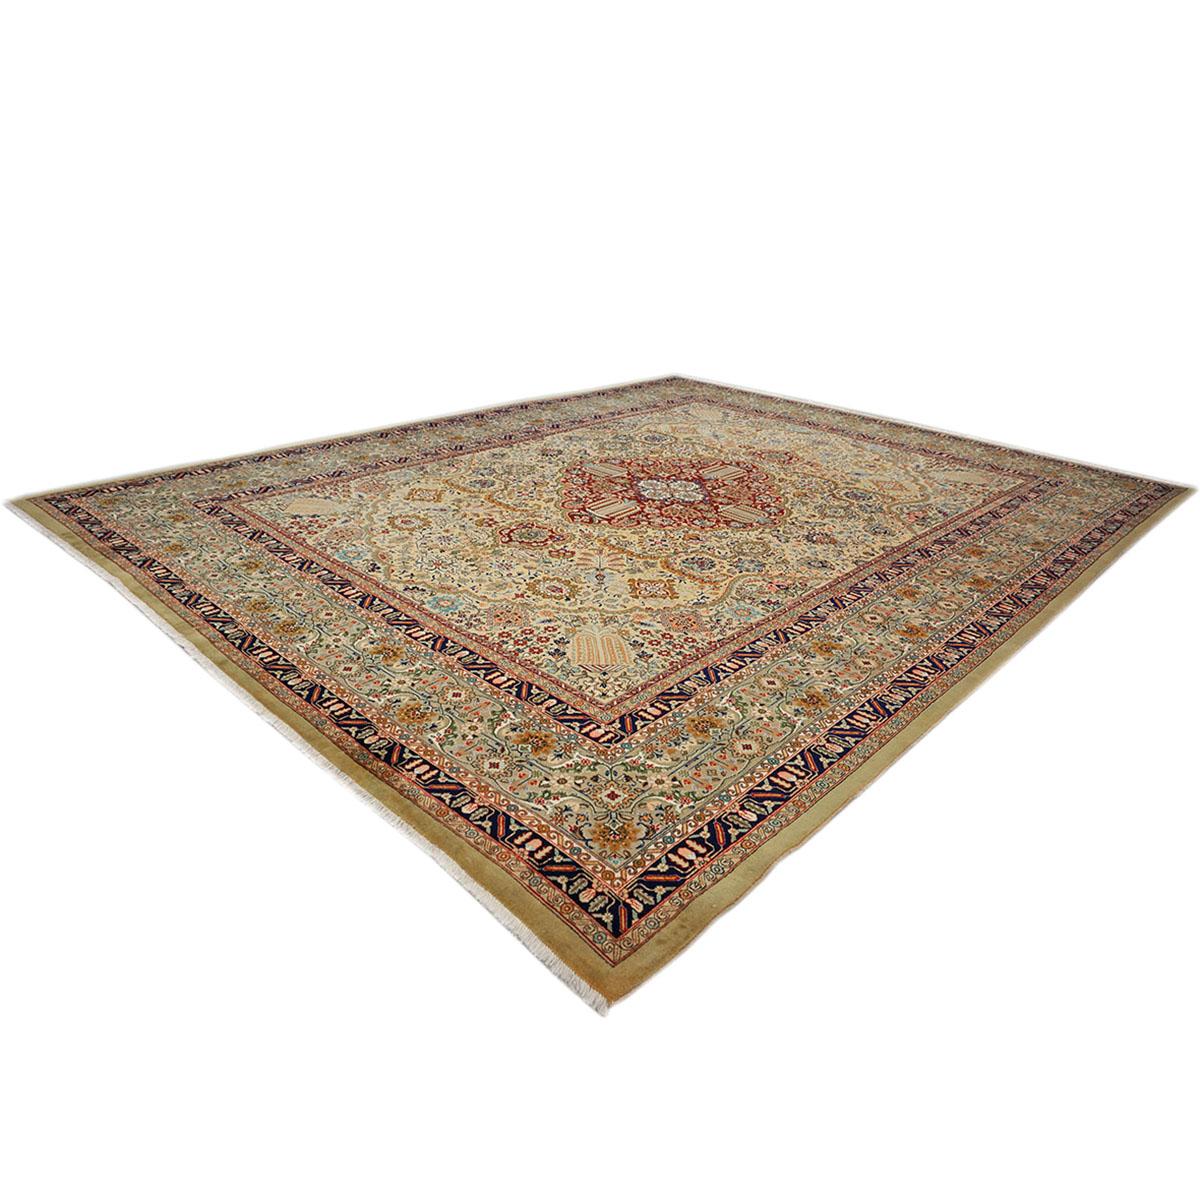 Antique Persian Tabriz 10x13 Tan, Taupe, Navy, & Gold Handmade Area Rug In Good Condition For Sale In Houston, TX